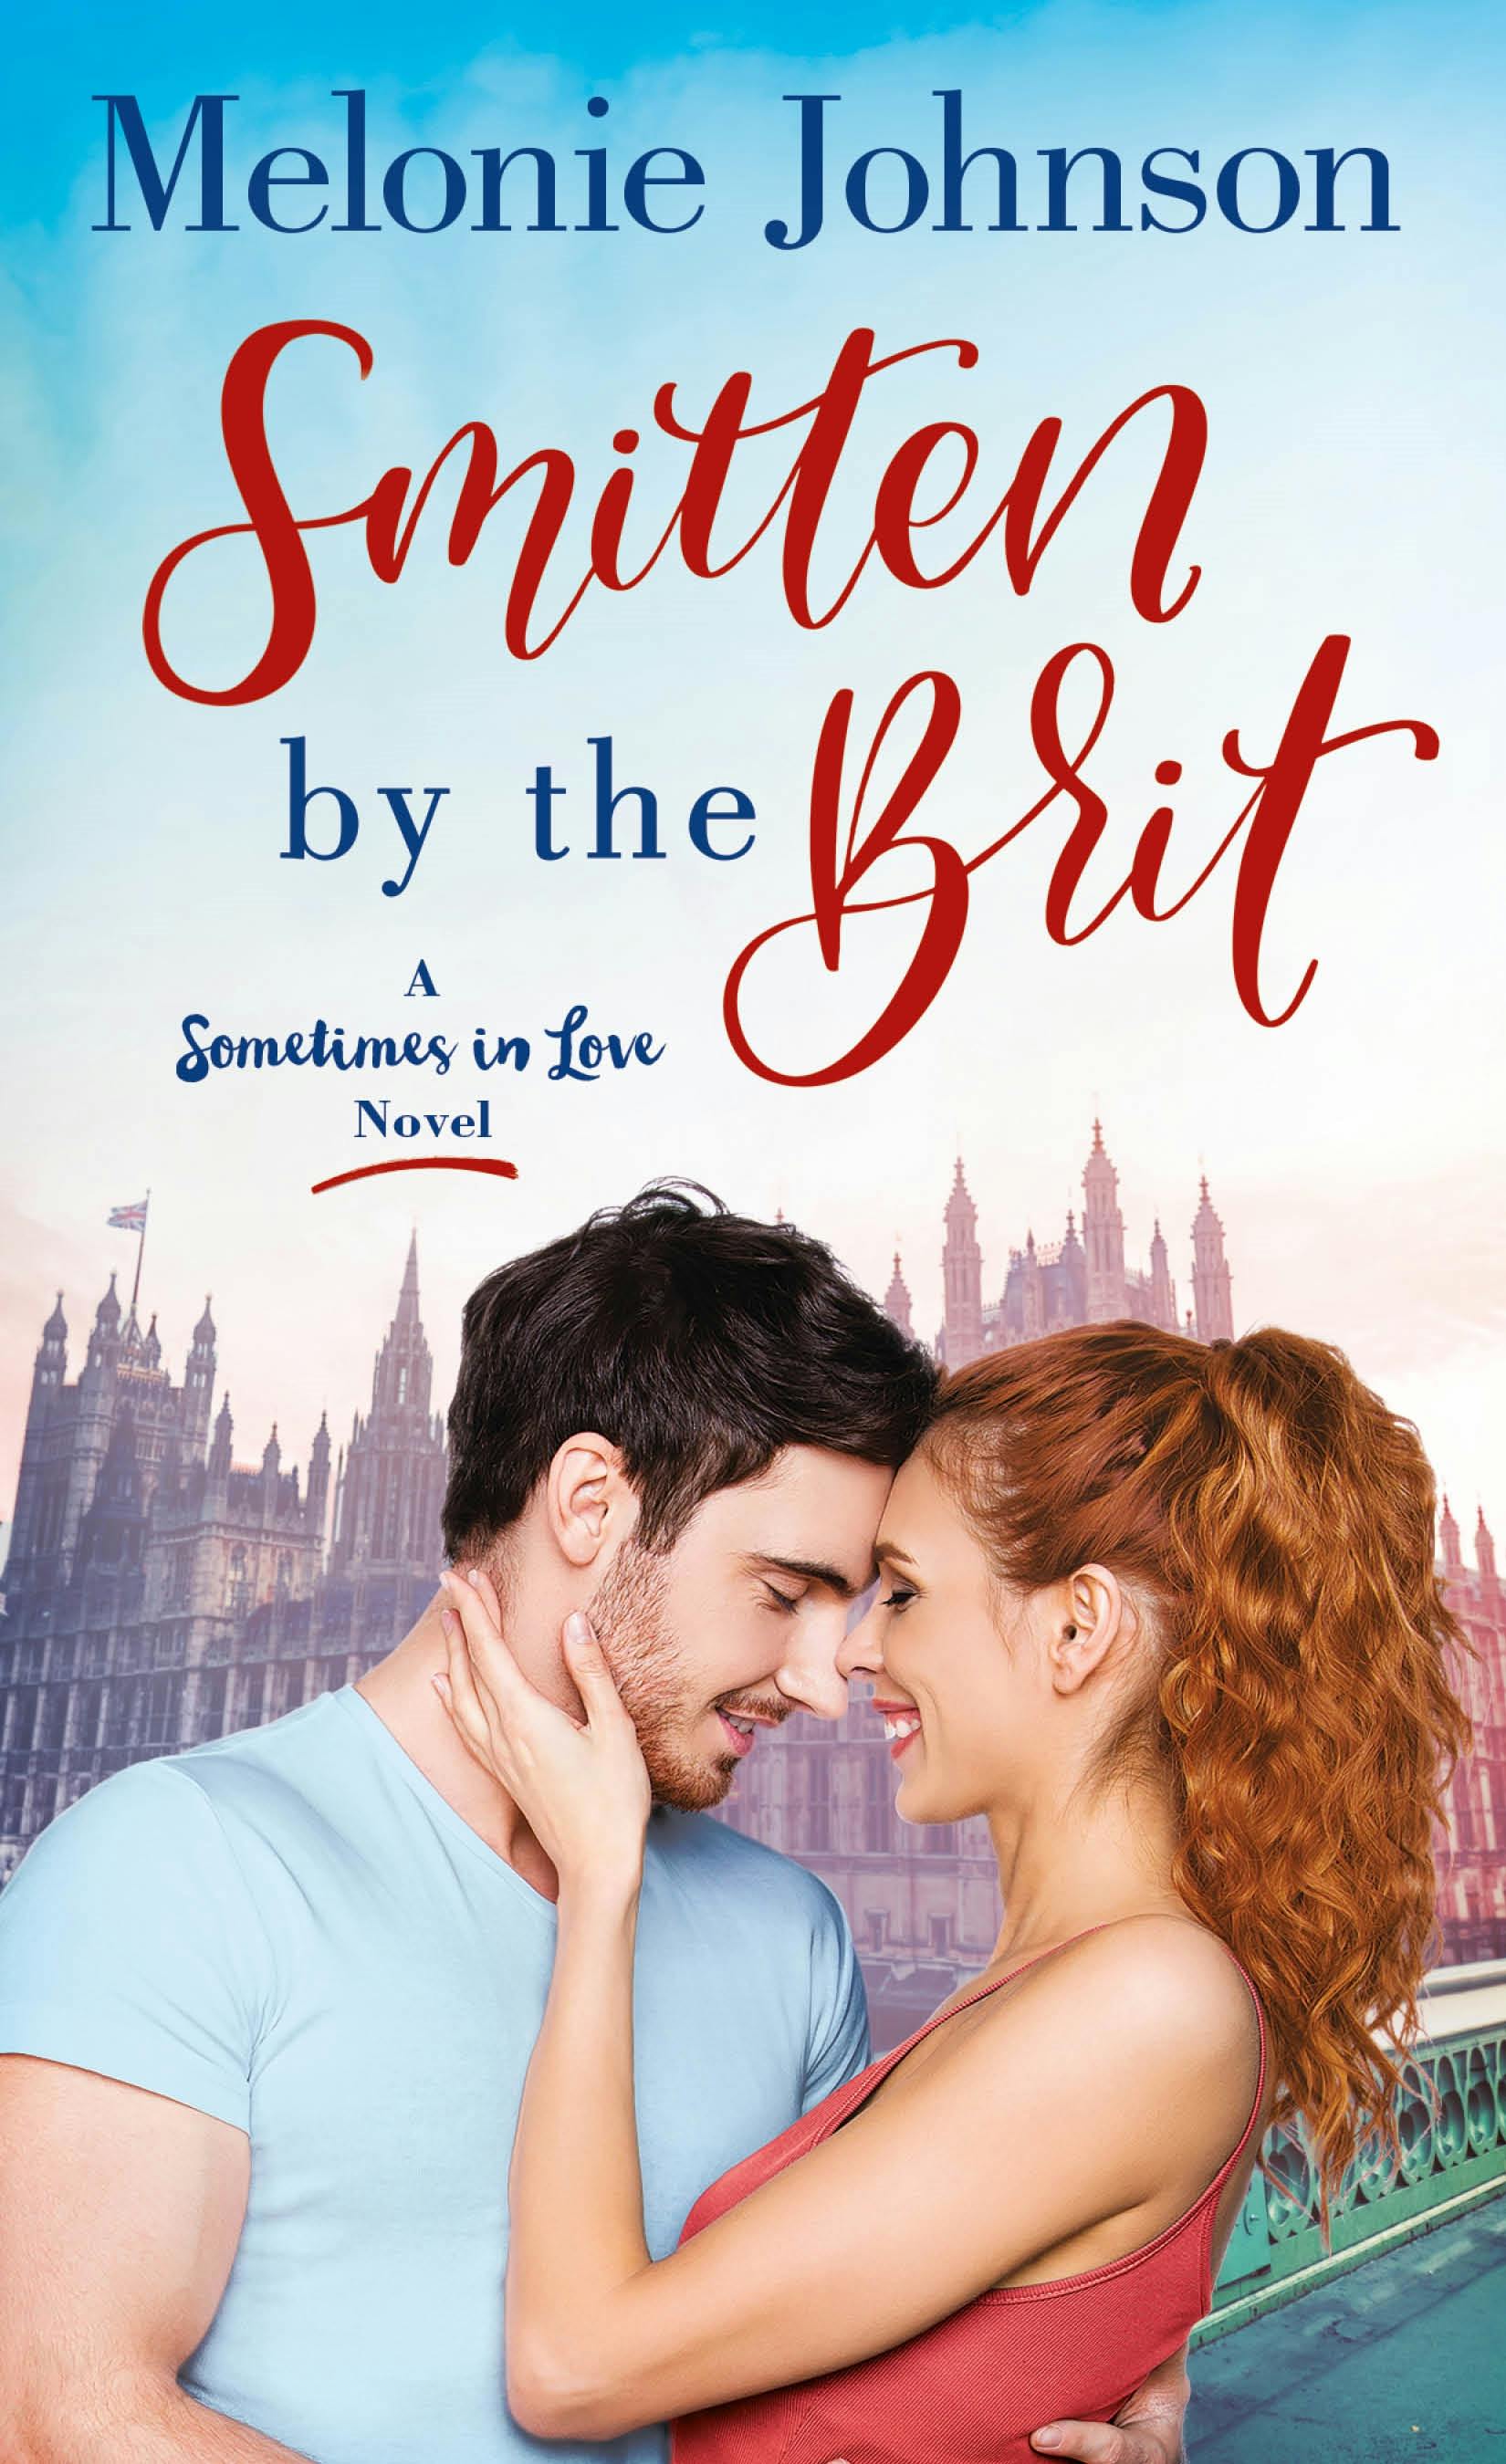 Image of Smitten by the Brit